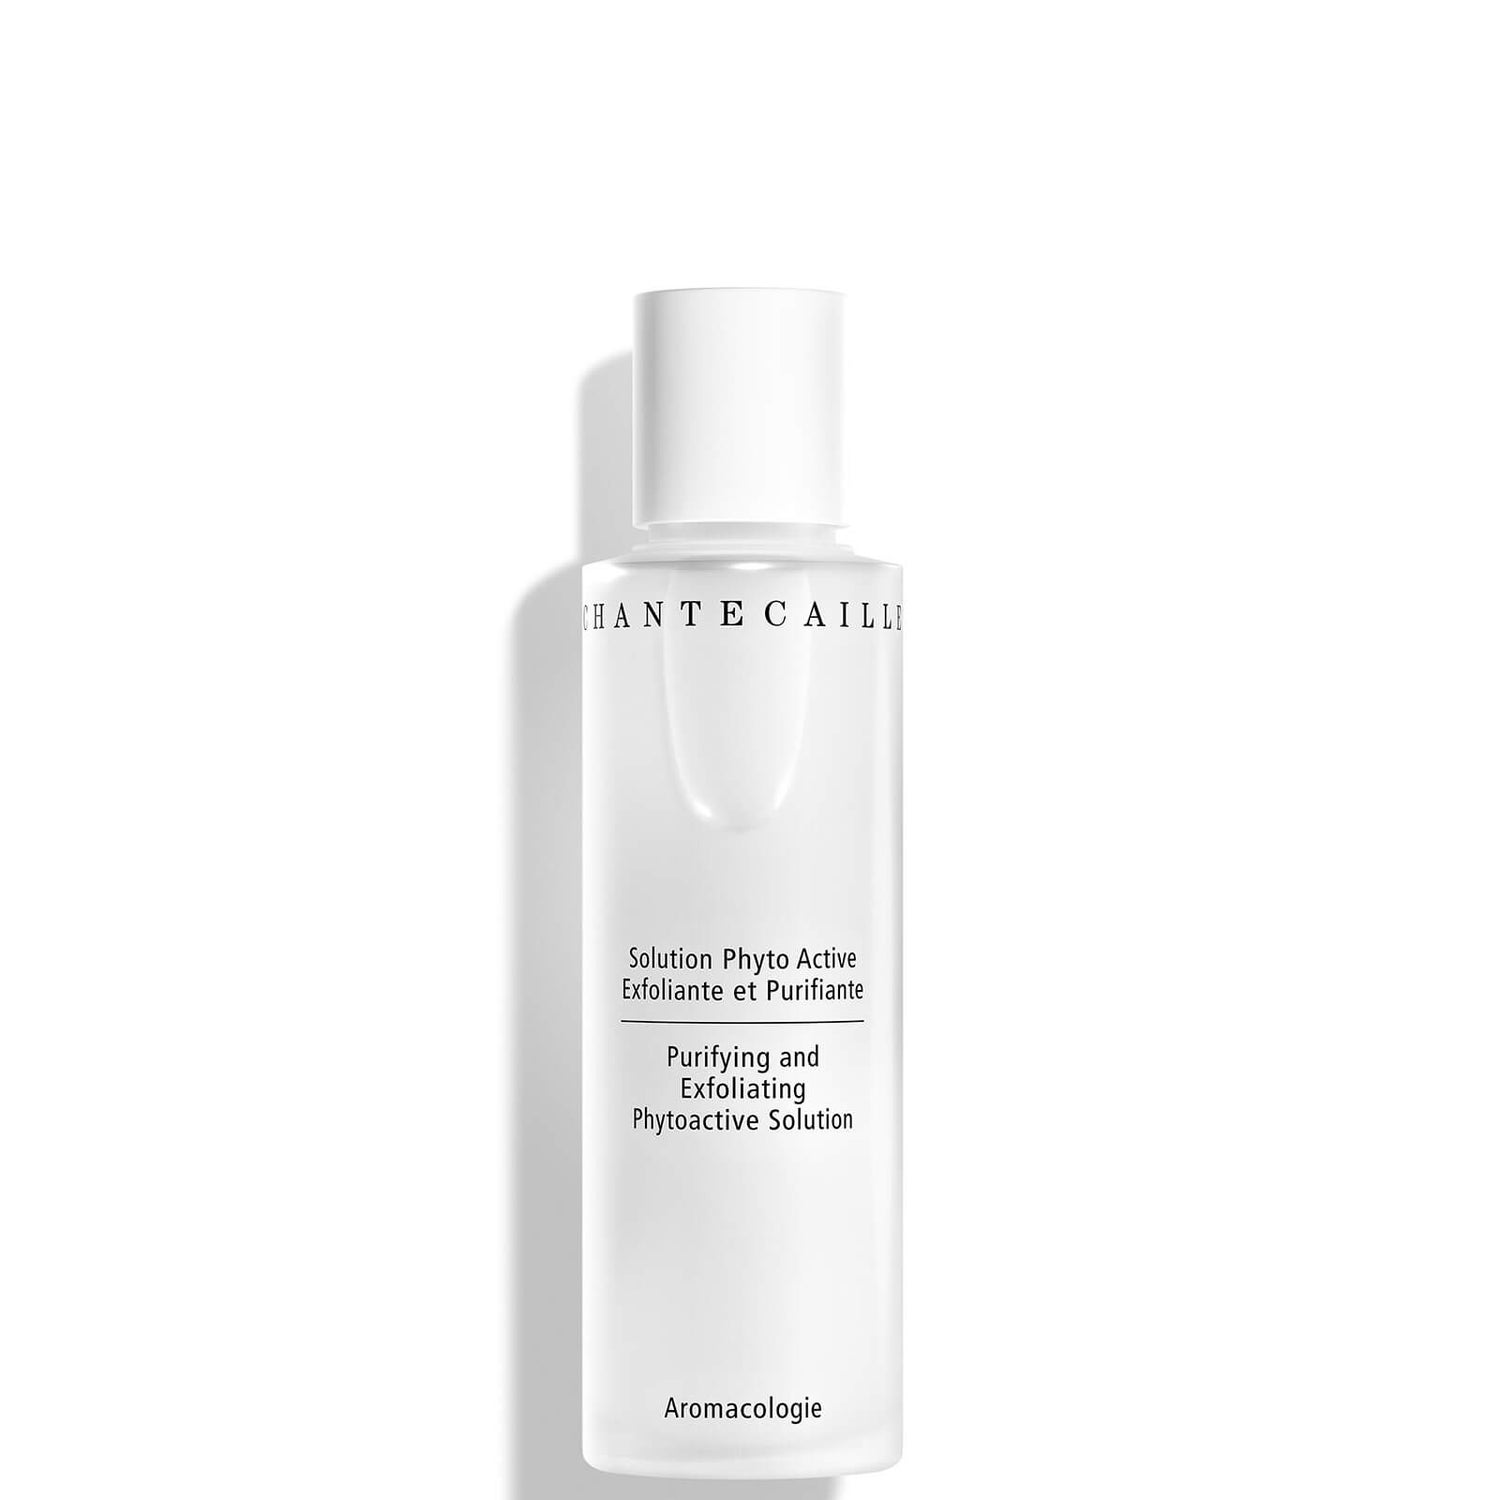 Chantecaille Purifying and Exfoliating Phytoactive Solution 100ml